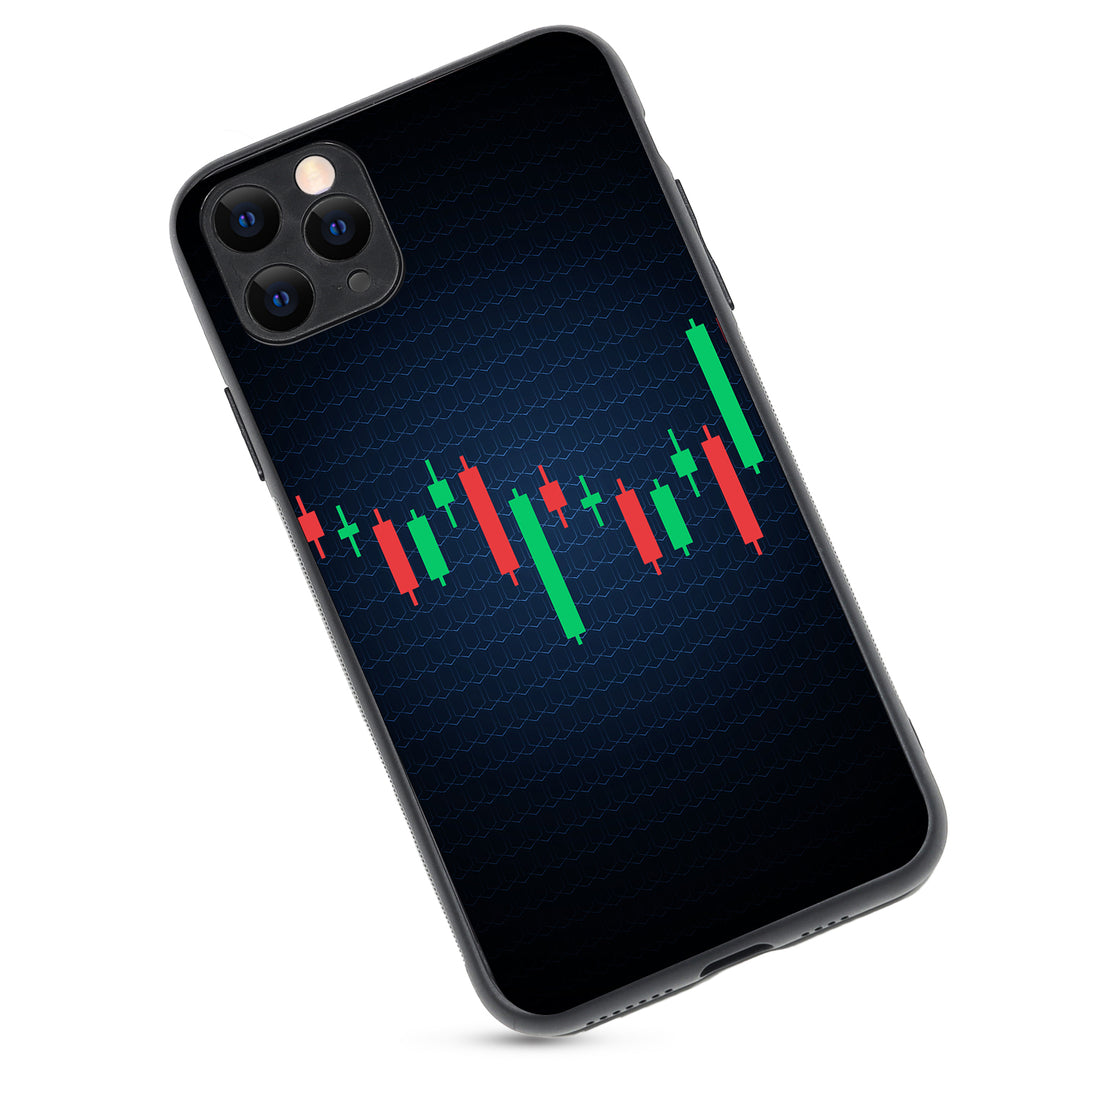 Candlestick Trading iPhone 11 Pro Max Case